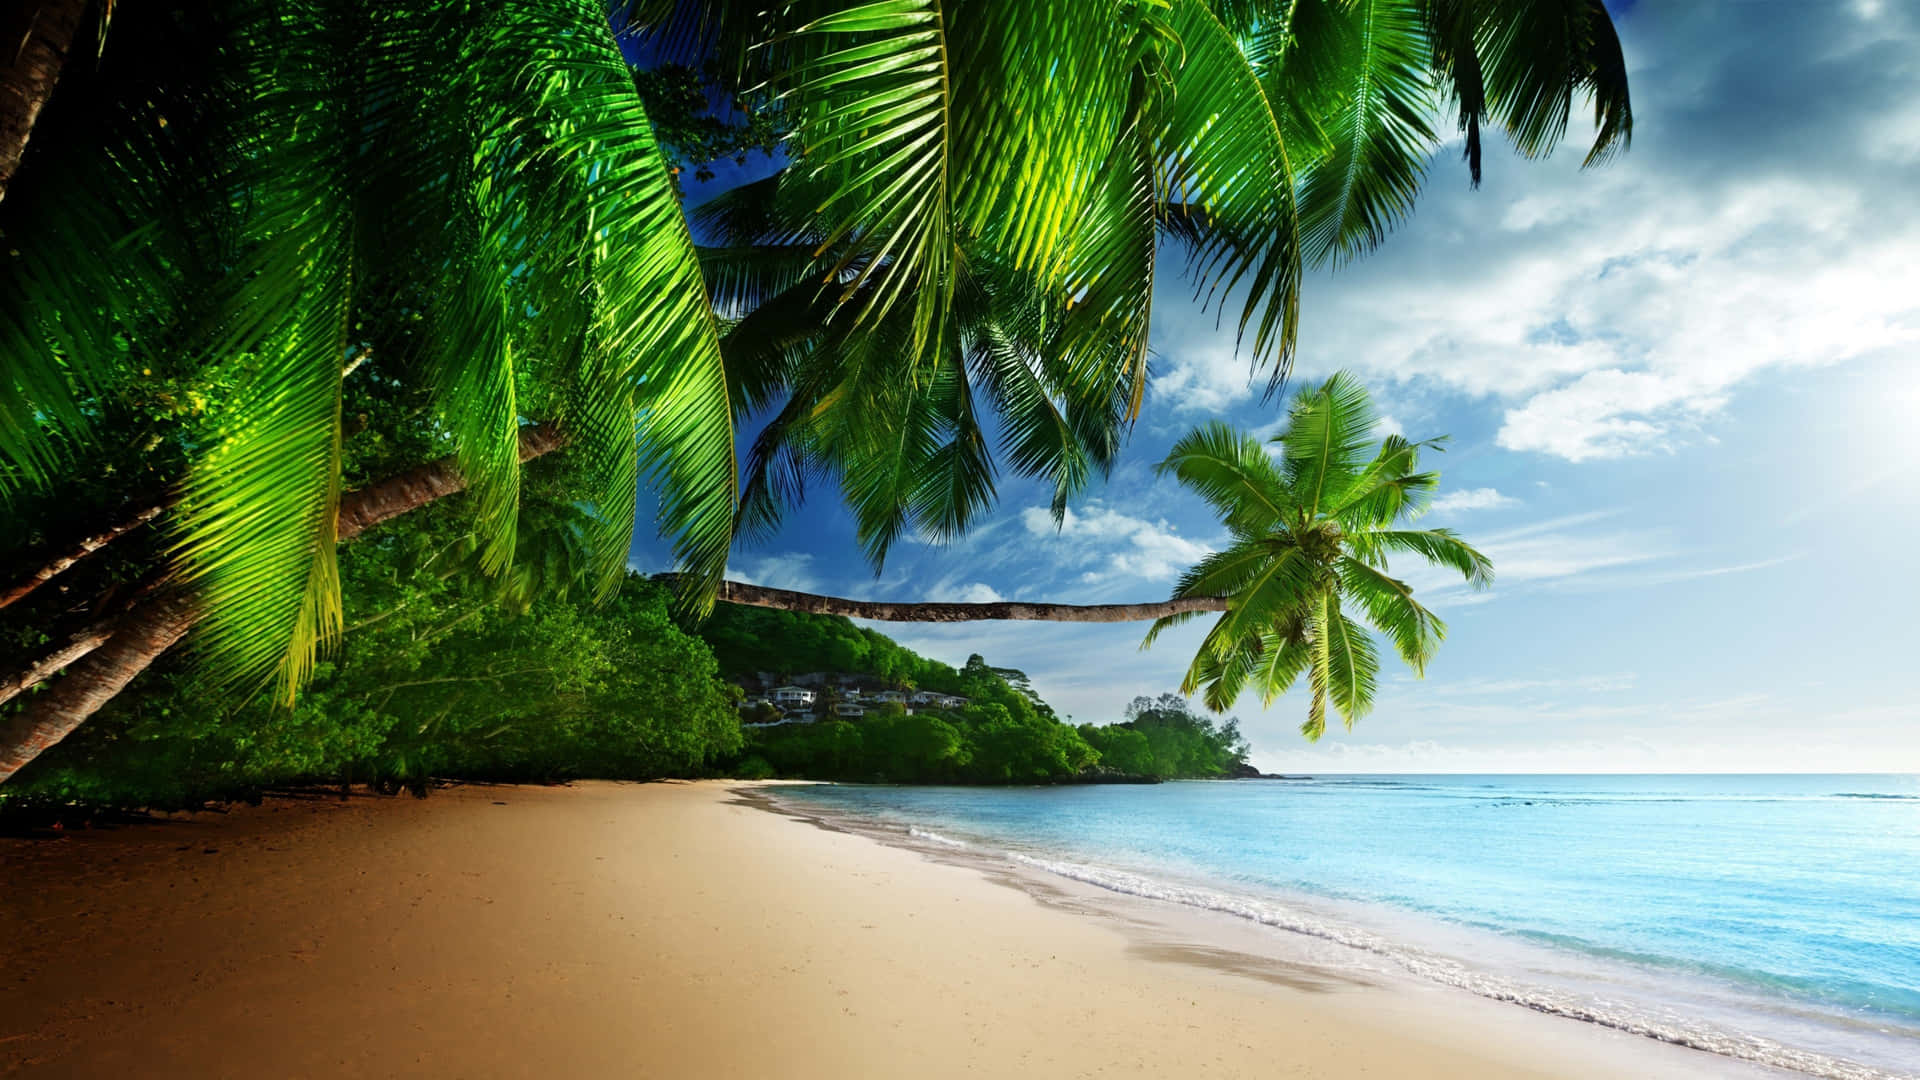 A Tropical Beach With Palm Trees And A Blue Sky